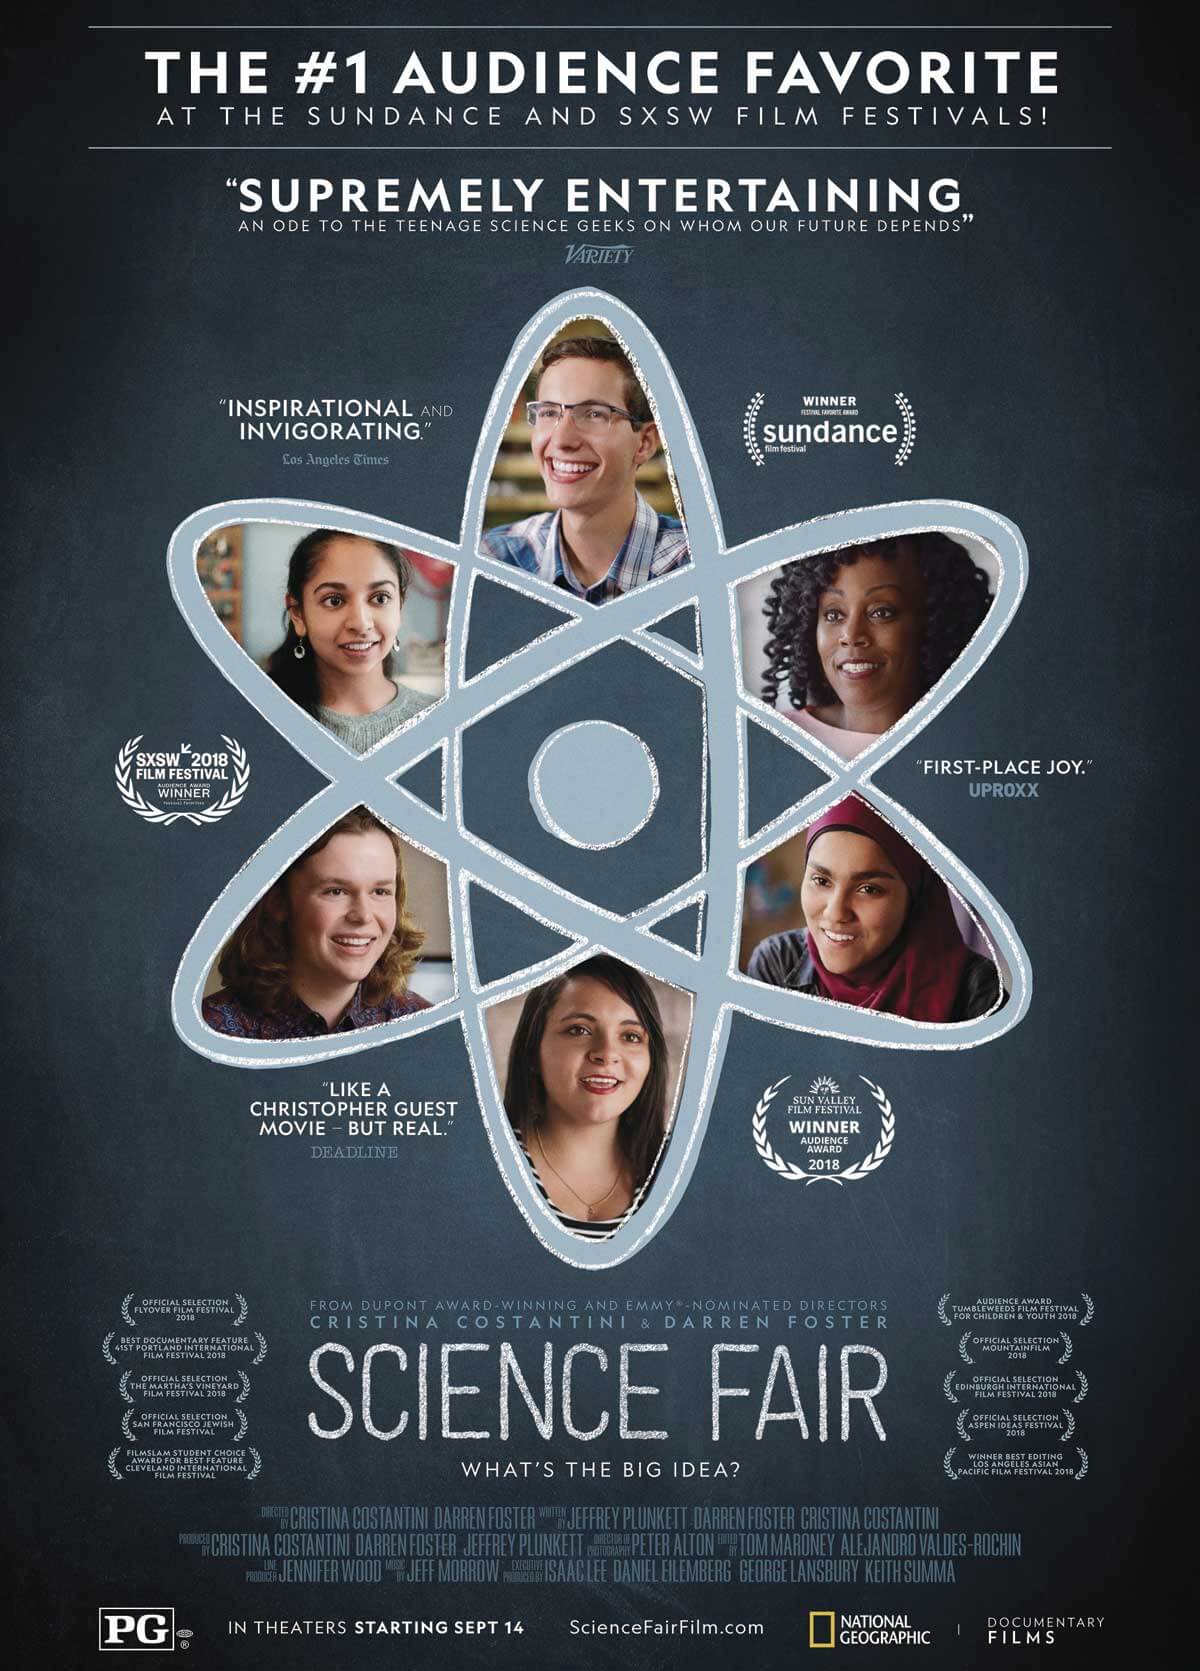 Come to the ‘Fair’: New doc puts focus on teens’ science smarts